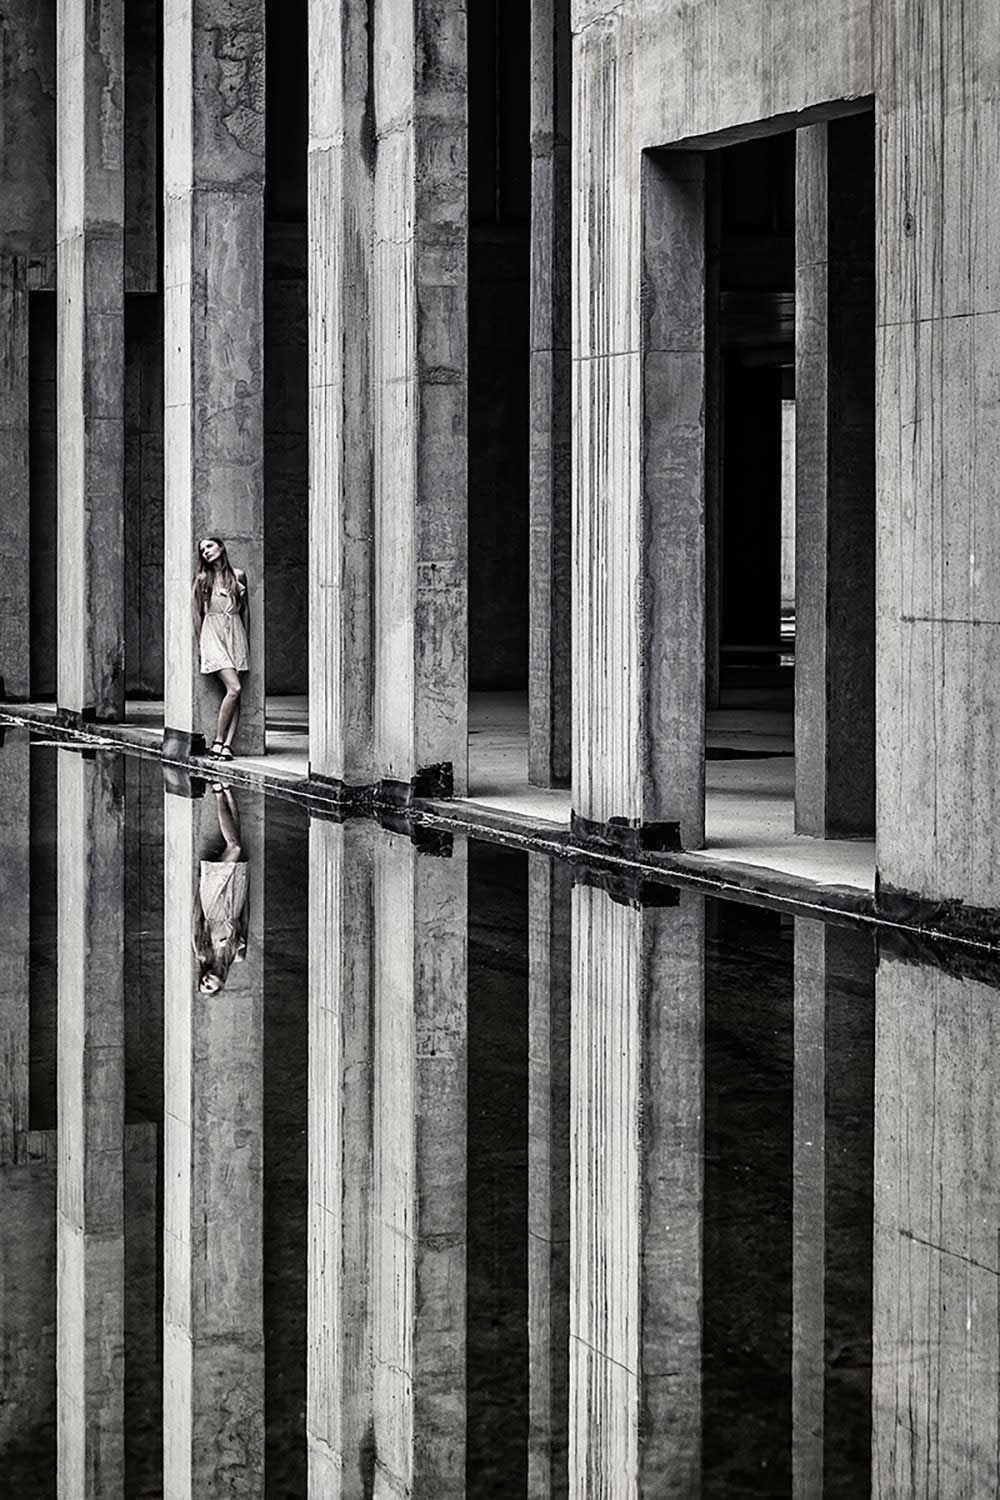 Peter Zelei | Nudes and Architecture